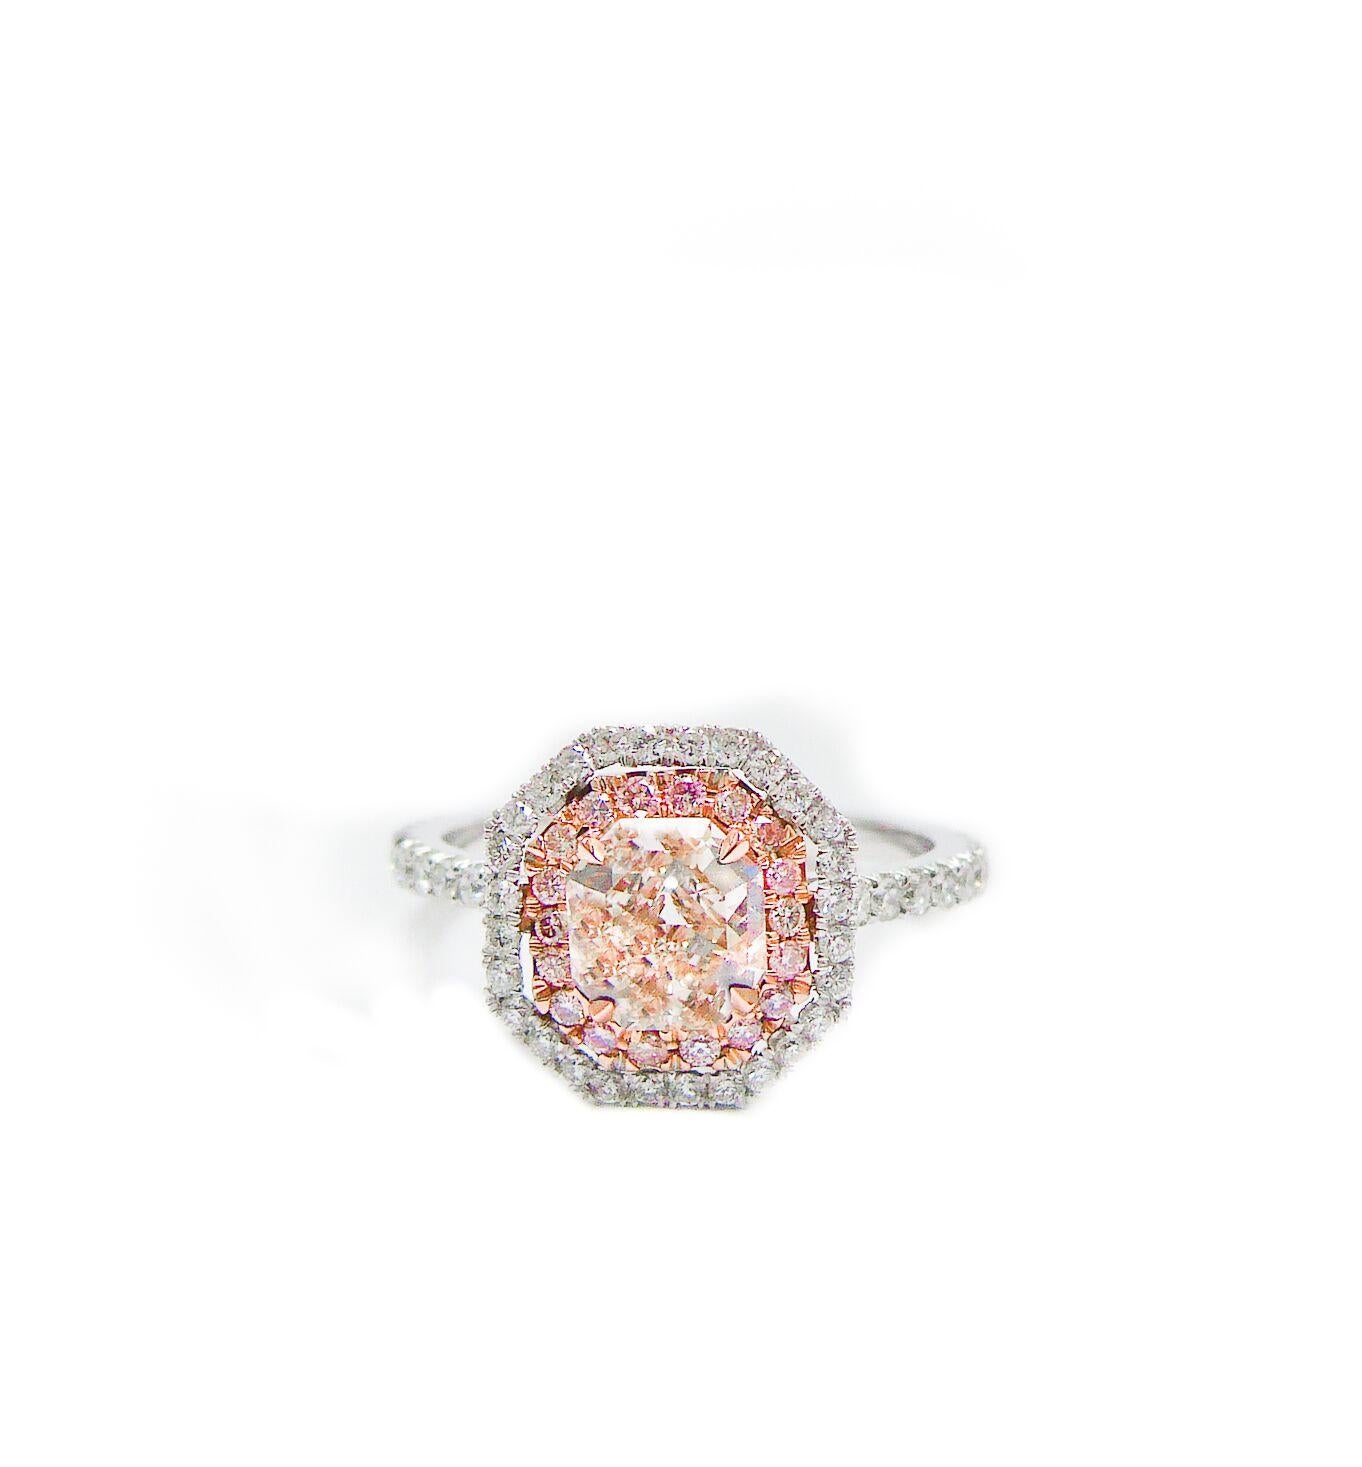 Diamond Engagement Ring With Center Gia Certified 1.00ct Fancy Light Pink Surrounded By One Row Of Pink Diamonds And One Row Of White Diamonds (.80ct) In Platinum And18kt Pink Gold Halo Setting
